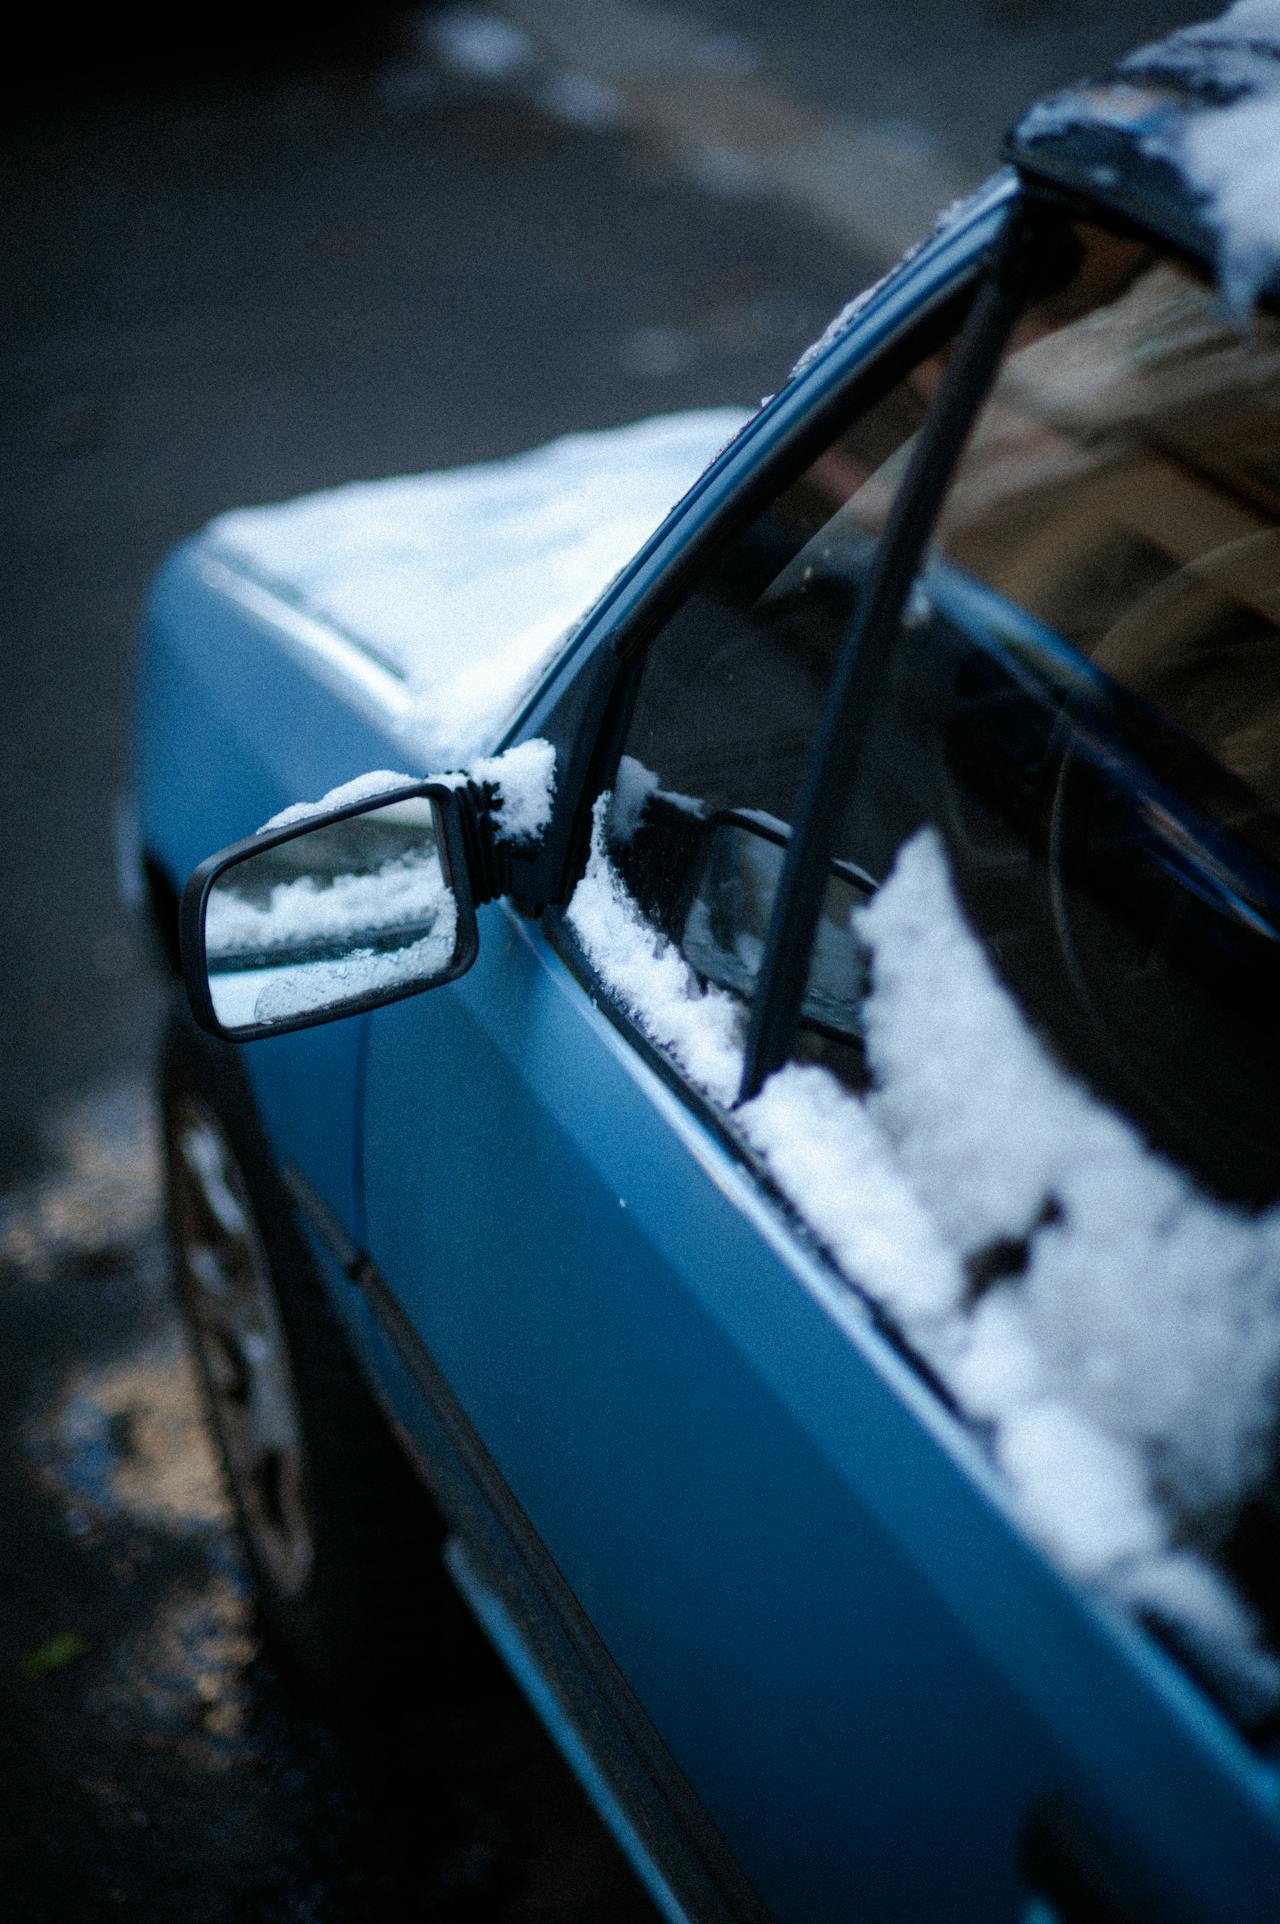 A blue car is shown with patches of snow on its side mirror, window, and roof.